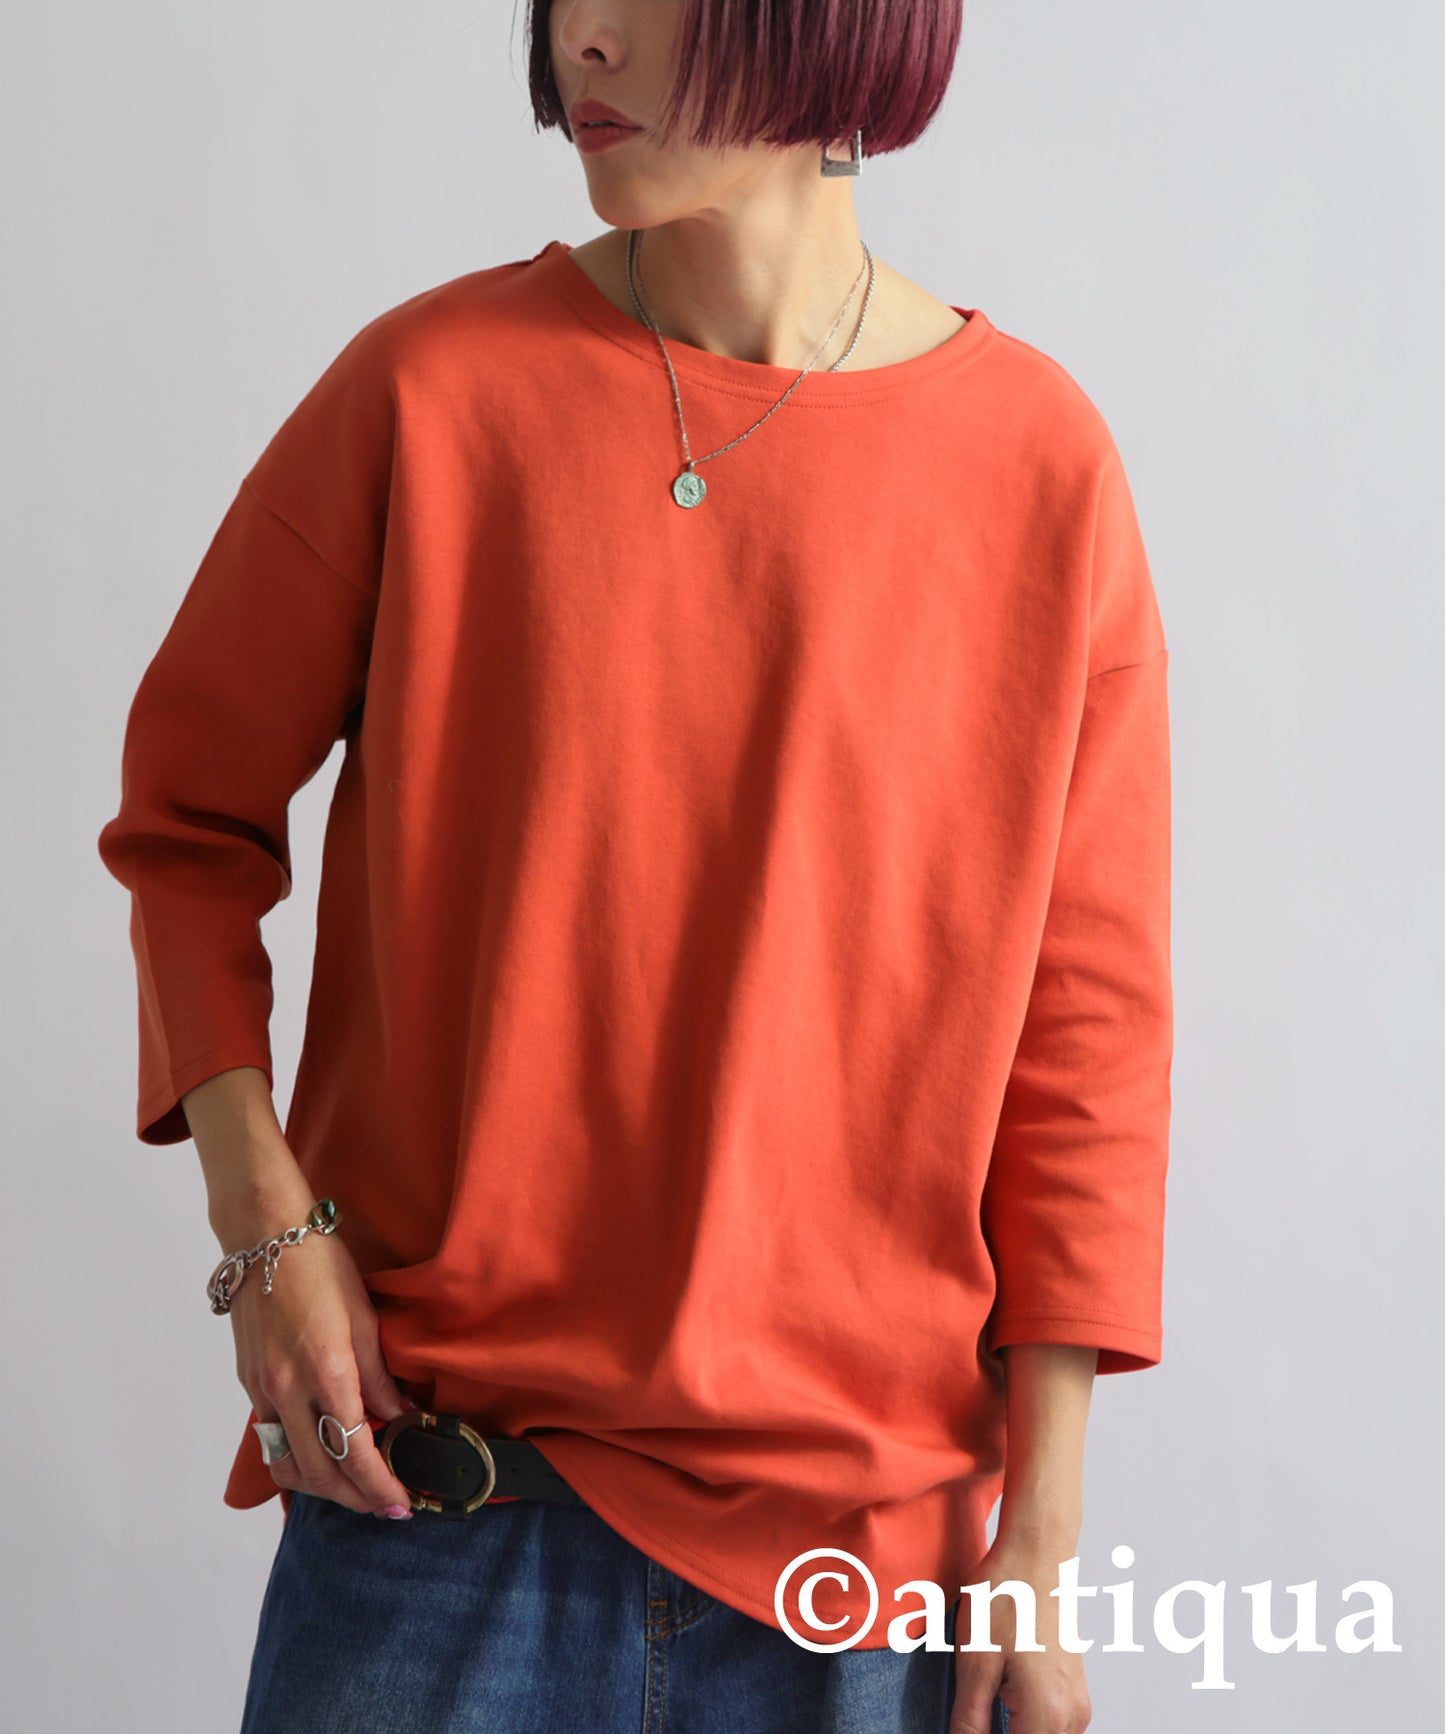 Double Knit Long Sleeve T-Shirt Ladies